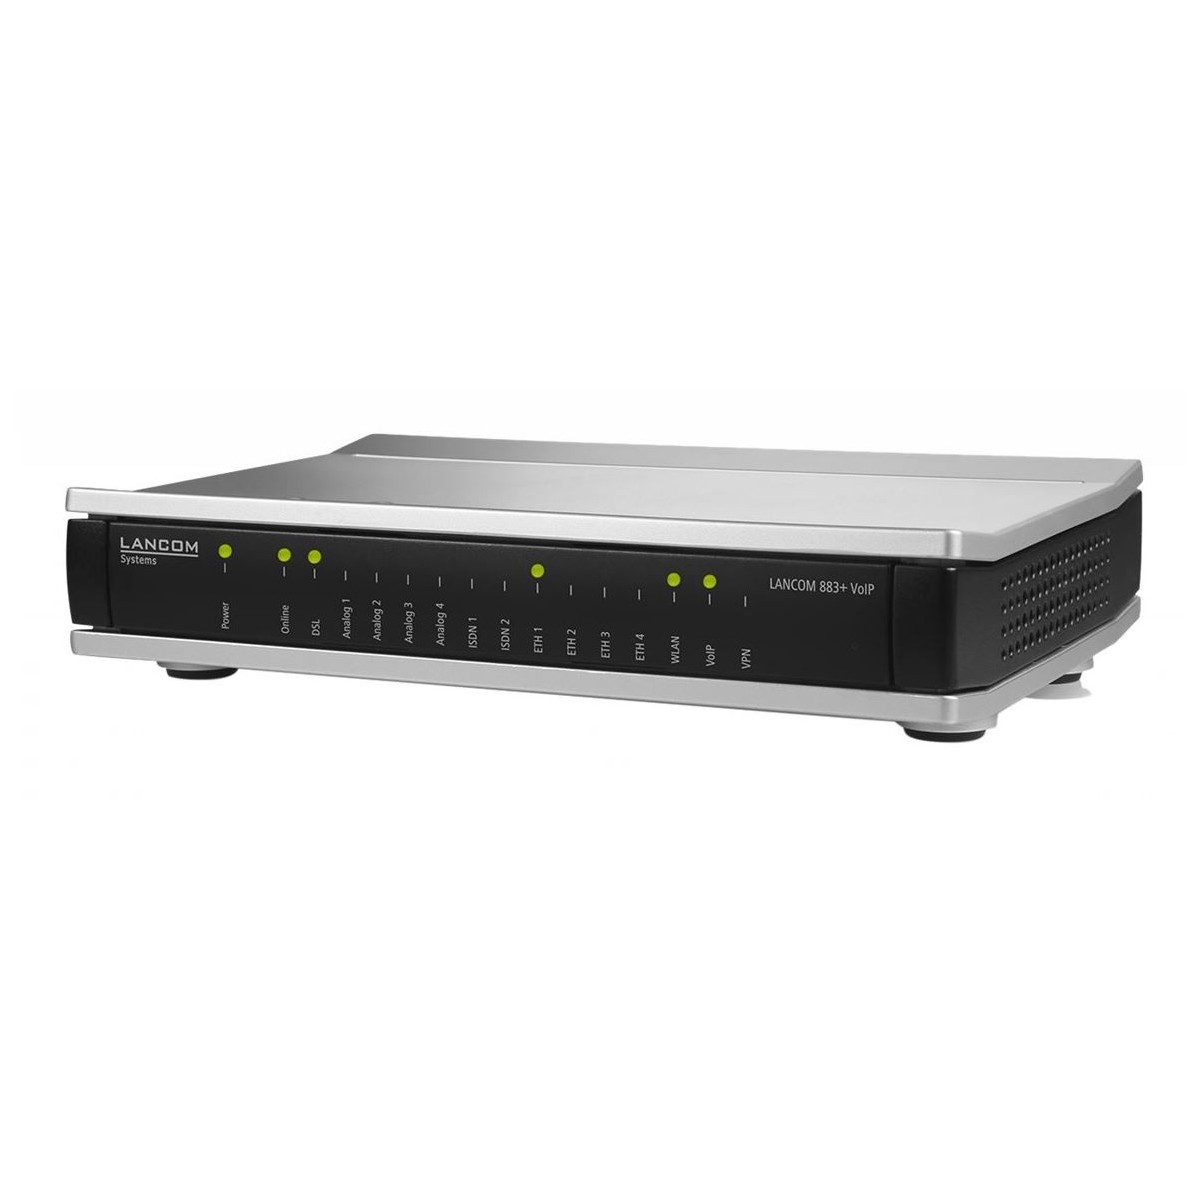 Lancom 883+ VoIP Wireless Router - Router - WLAN